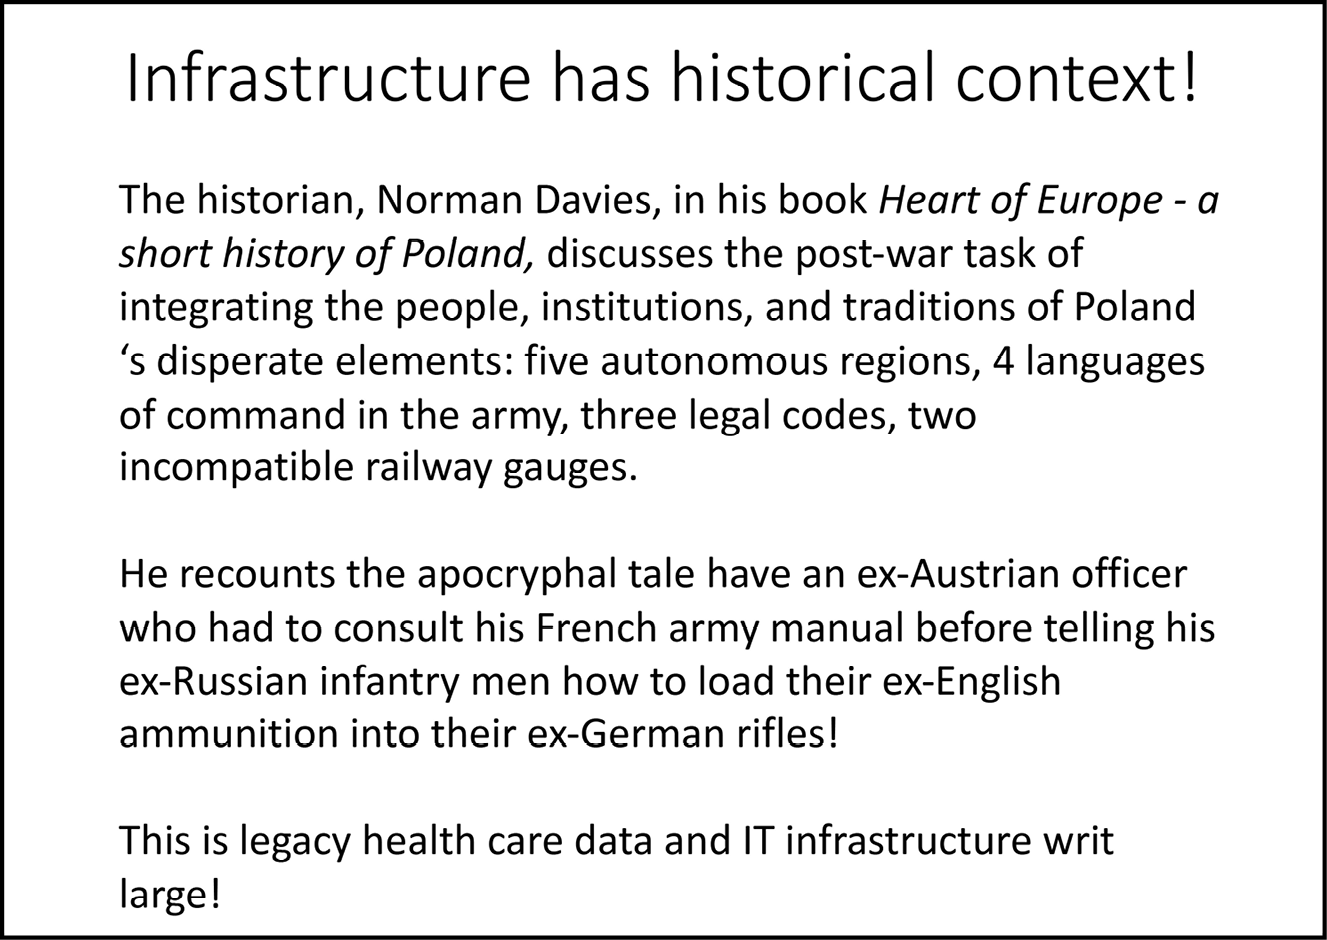 A presentation slide reading: Infrastructure has historical context! / The historian, Norman Davies, in his book ‘Heart of Europe - a short history of Poland’, discusses the post-war task of integrating the people, institutions and traditions of Poland’s disperate elements: five autonomous regions, 4 languages of command in the army, three legal codes, two incompatible railway gauges. / He recounts the apocryphal tale have an ex-Austrian officer who had to consult his French army manual before telling his ex-Russian infantry men how to load their ammunition into their ex-German rifles! / This is legacy health care data and IT infrastructure writ large!  |  THIS IS FIGURE 8.3 IN THE TEXT